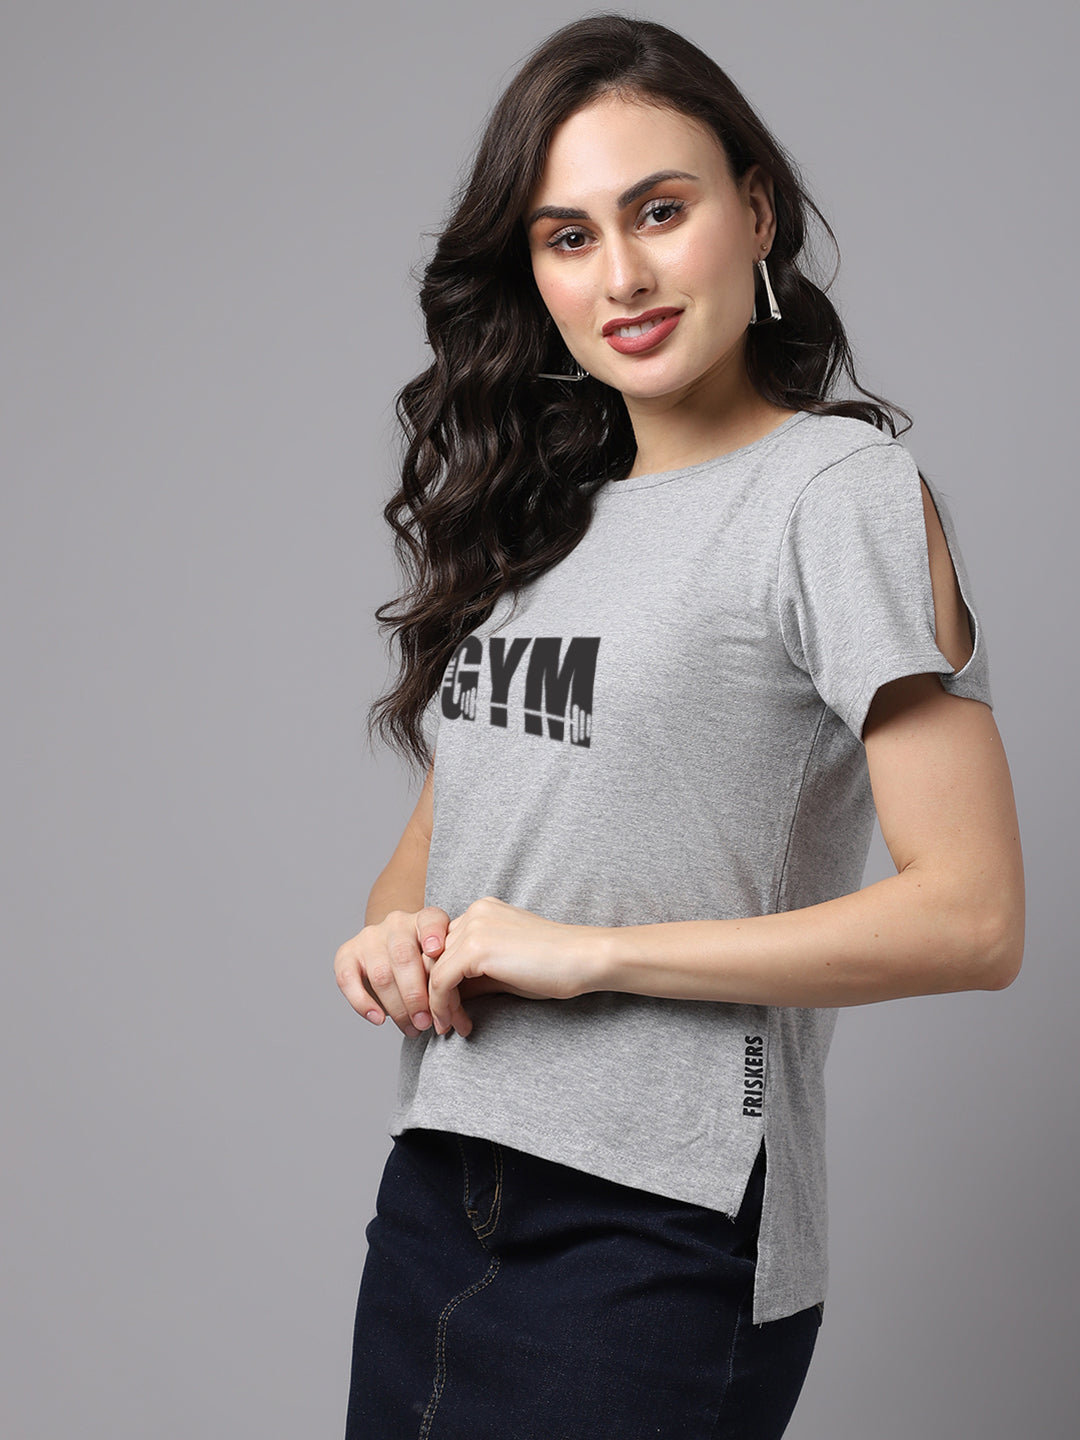 Women Slit Sleeves Gym Printed Pure Cotton T-Shirt - Friskers